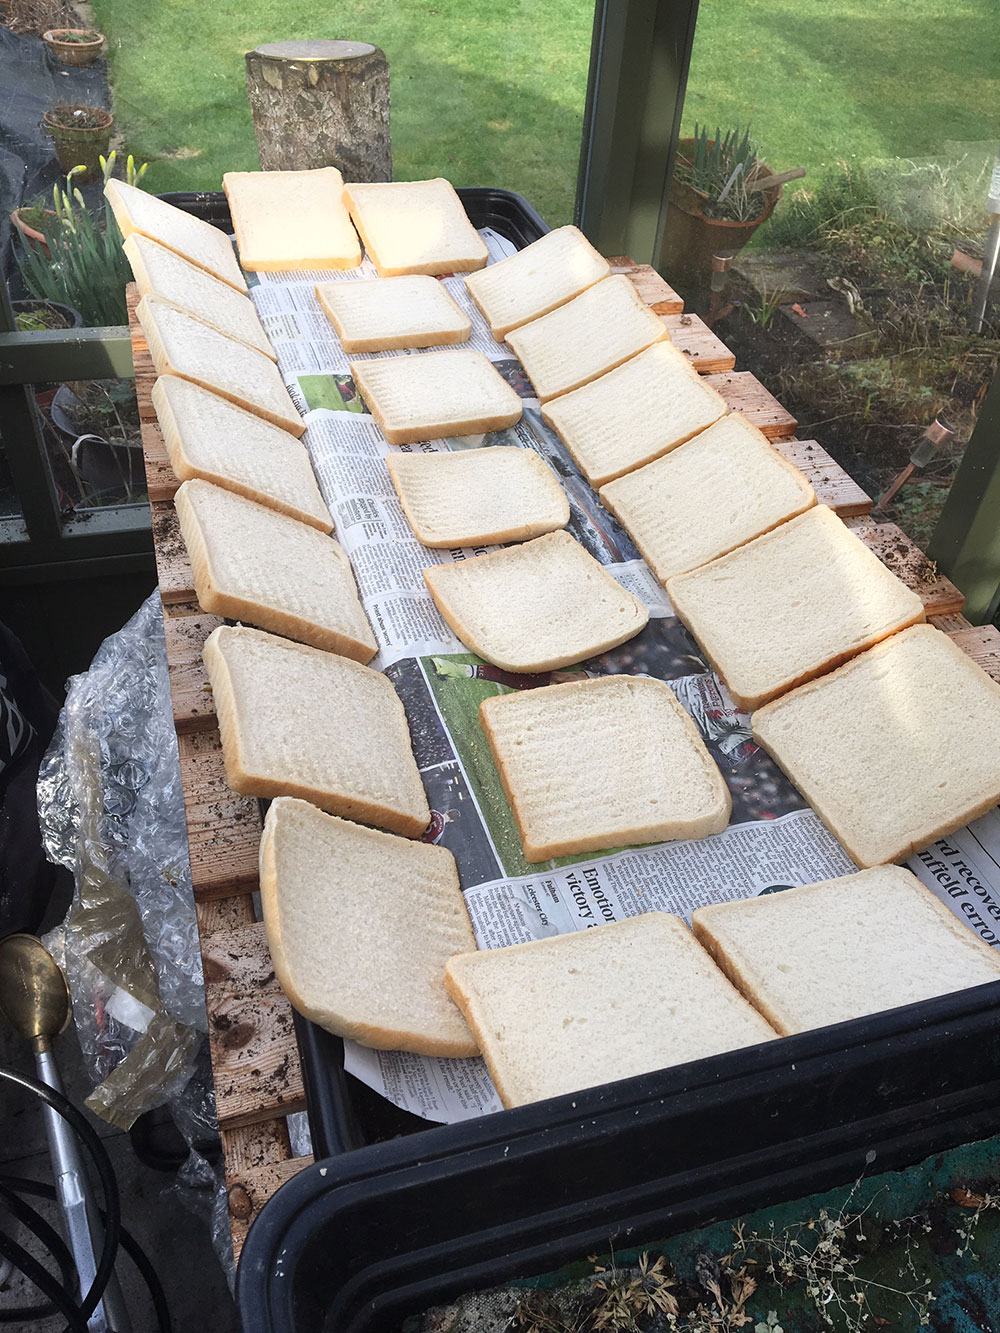 River Float Fishing with Punched Bread: Shhhhh!!! Don’t tell Mrs Barnes. Alan likes to dry the bread and make it go stale and he does it by laying out slices on trays in his wife’s greenhouse!